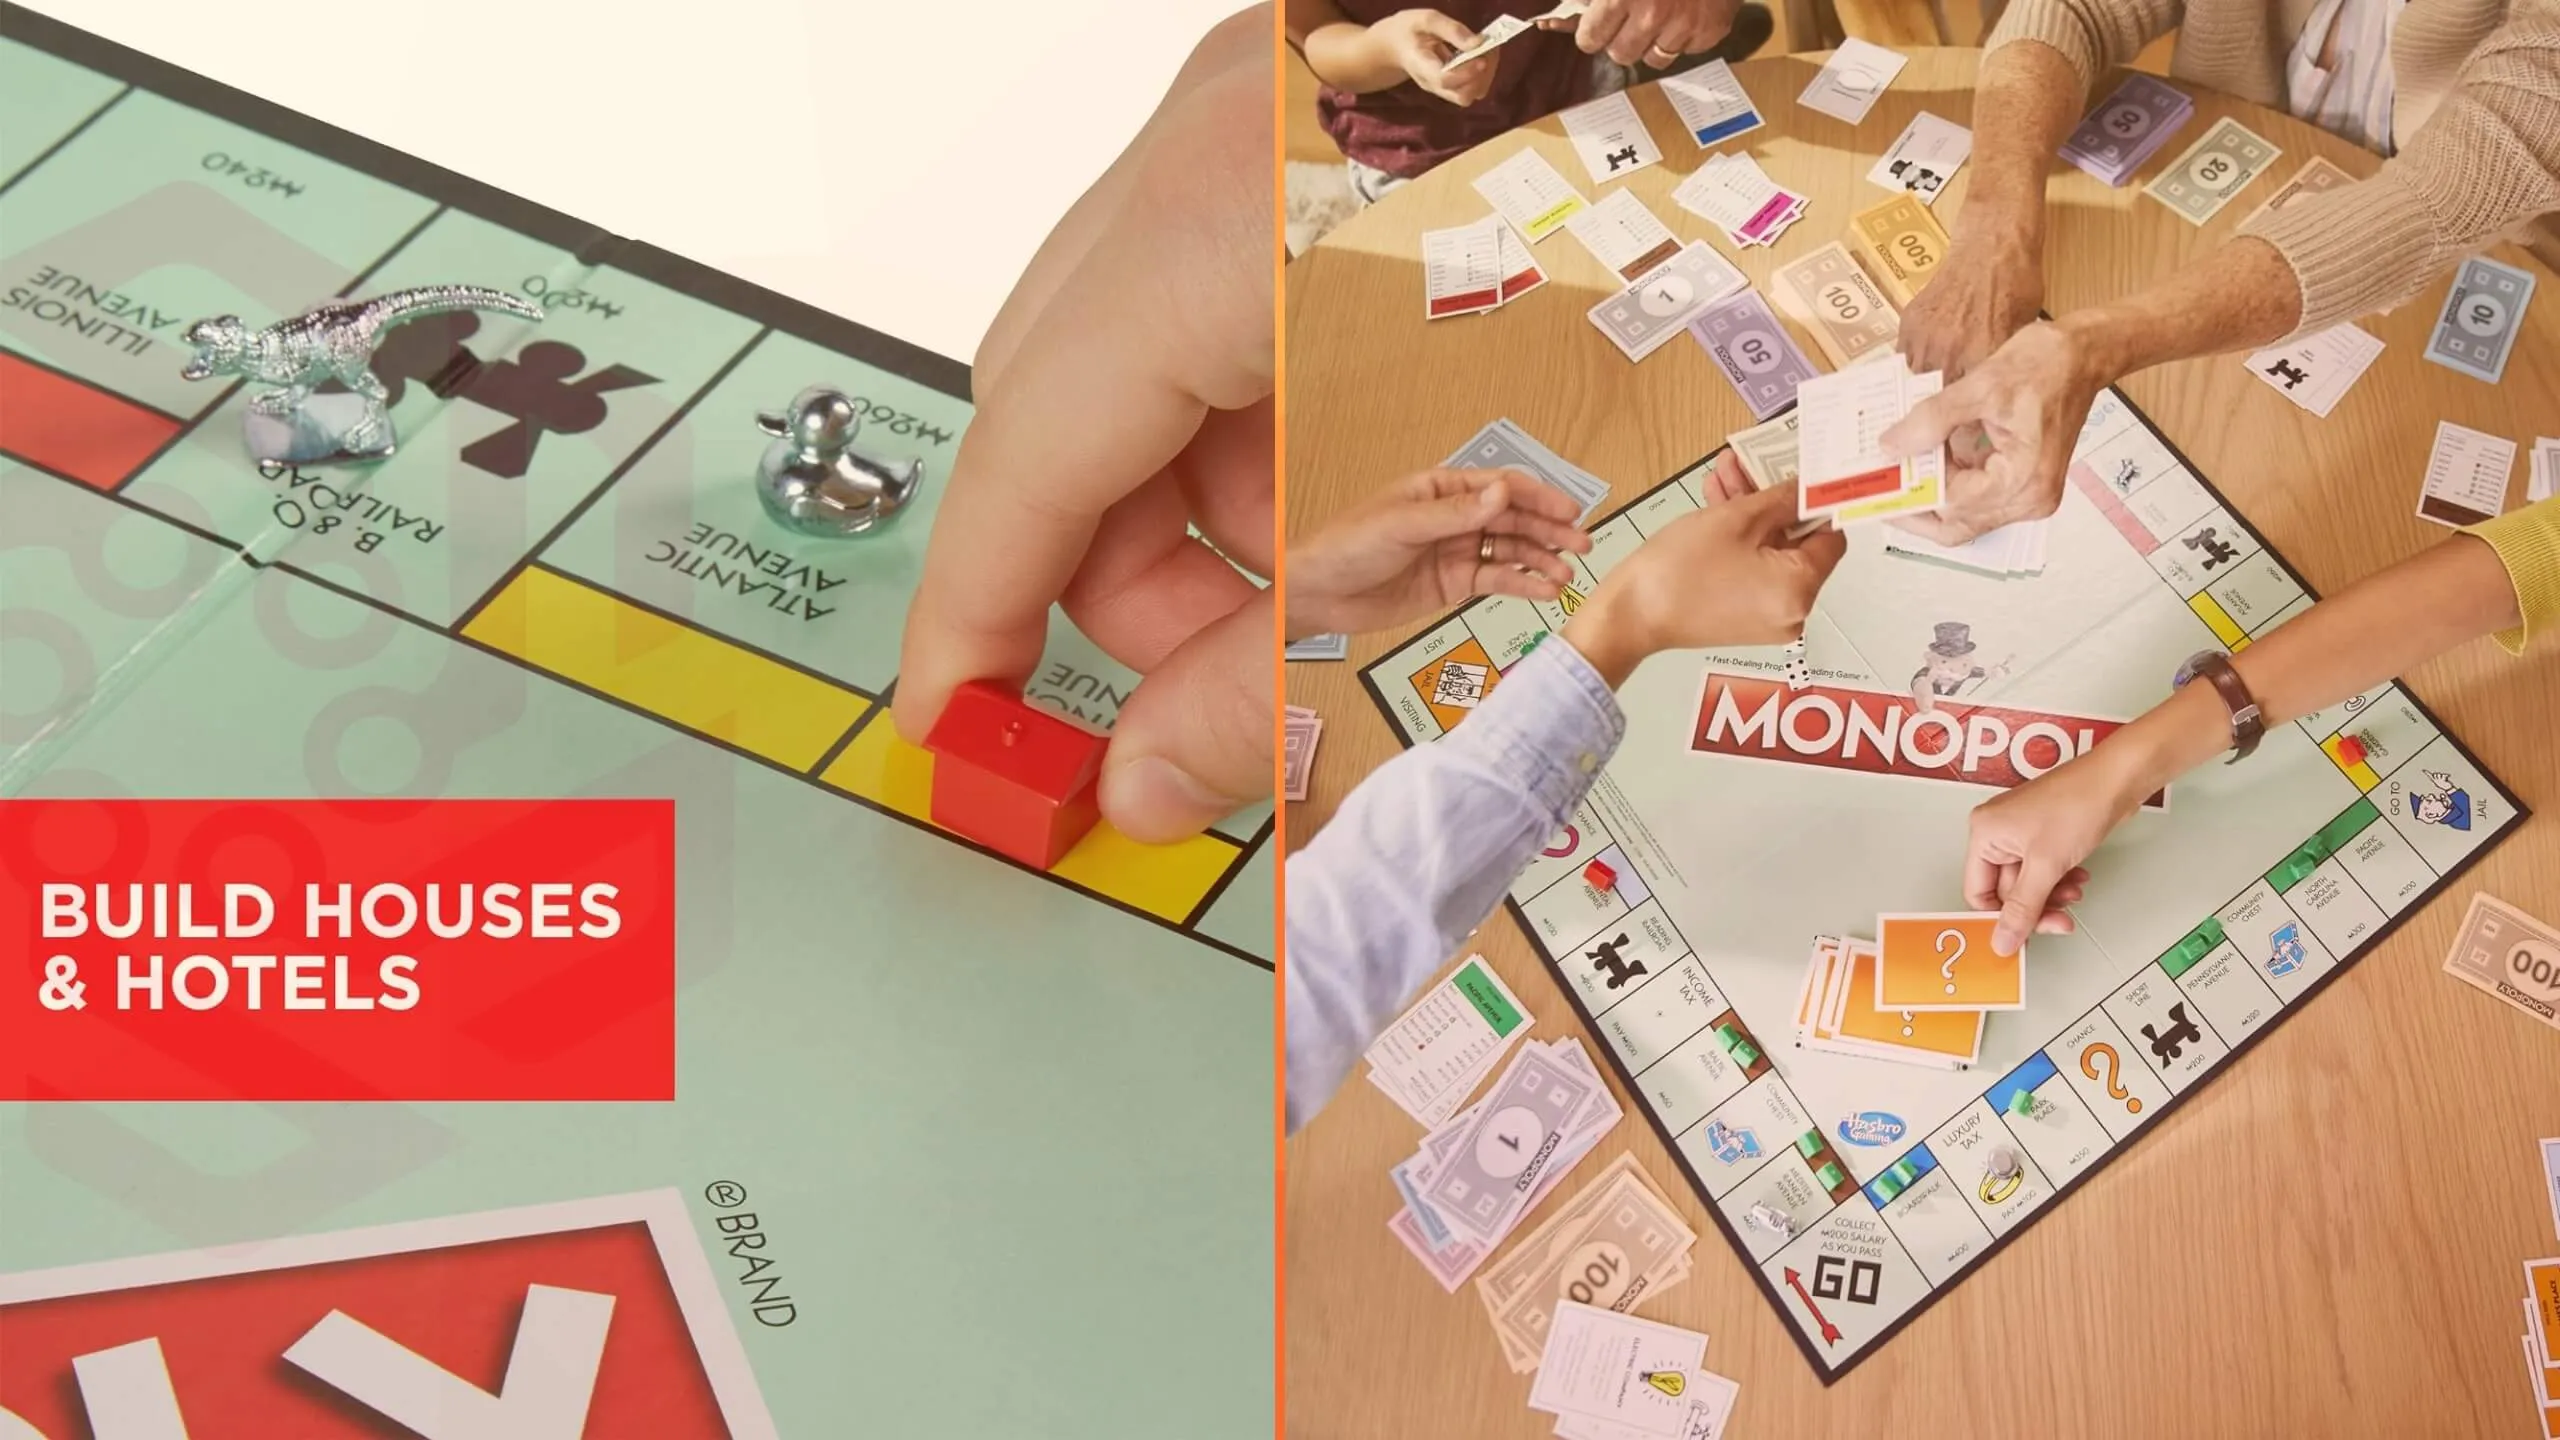 Monopoly images